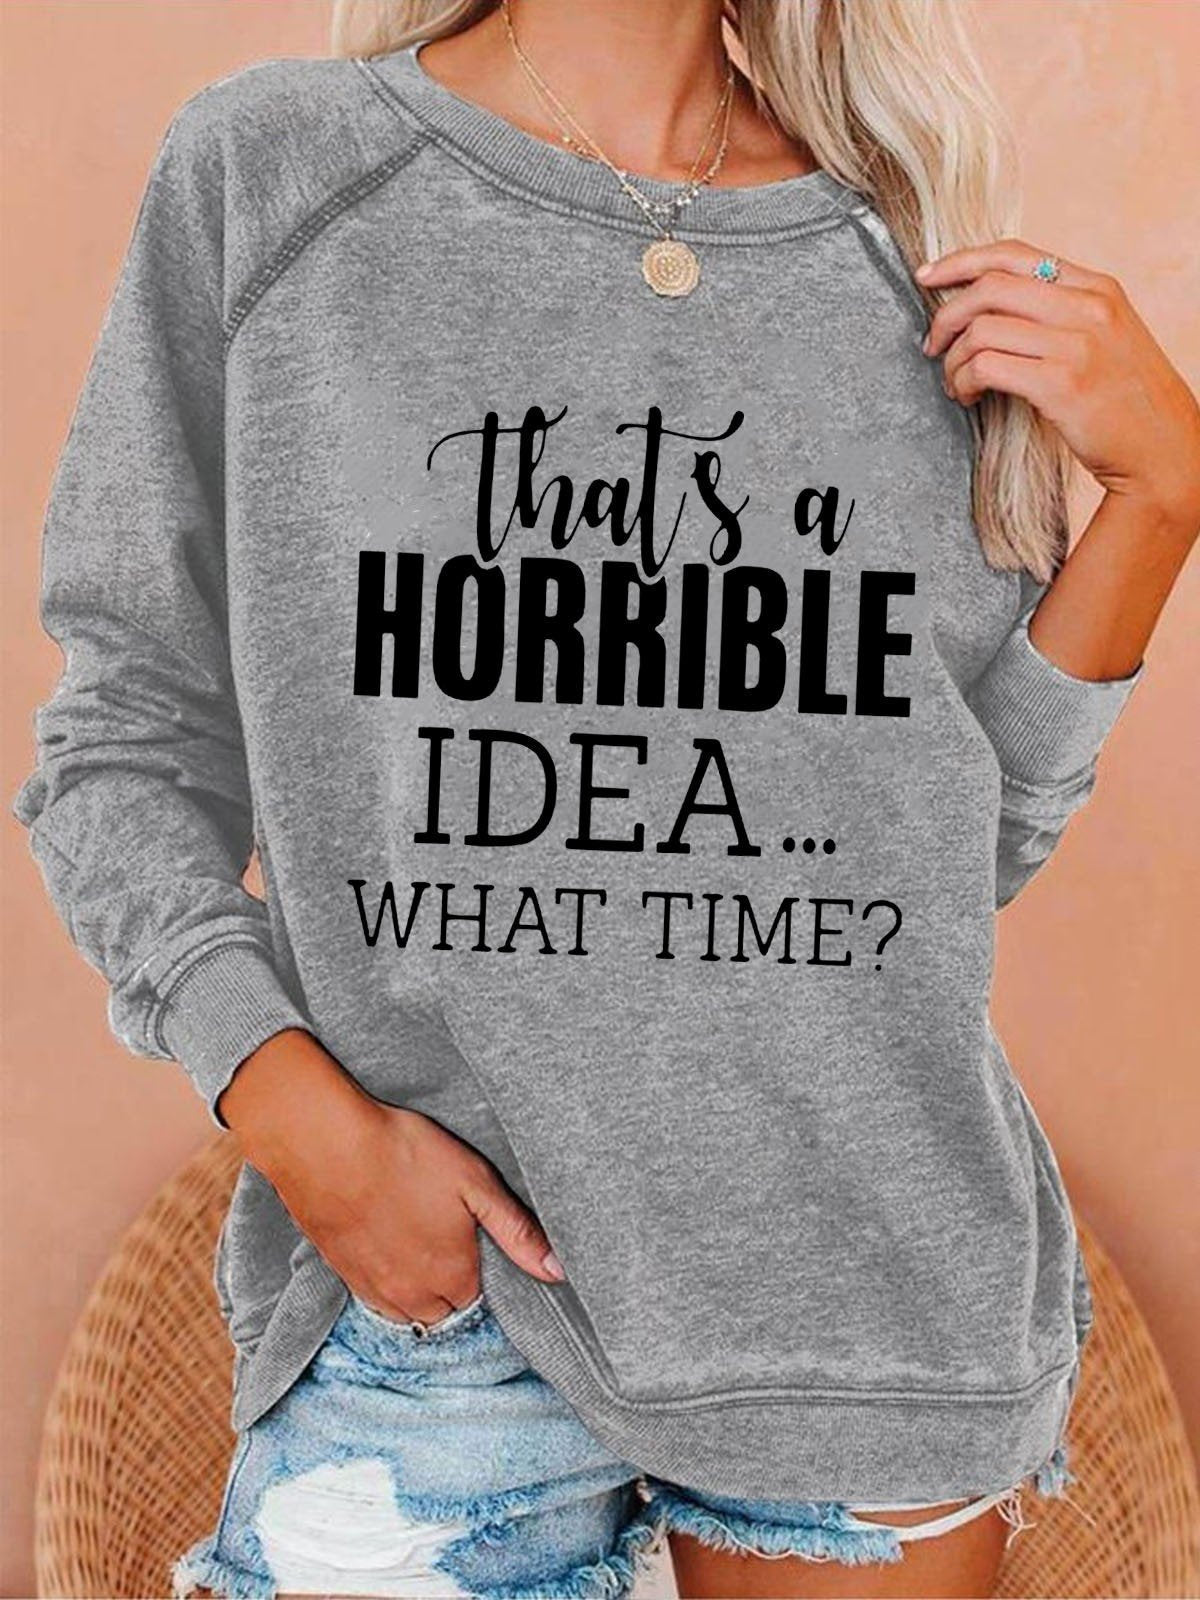 Women's That's a horrible Ideas Text Print Long Sleeve Sweatshirt - Outlets Forever